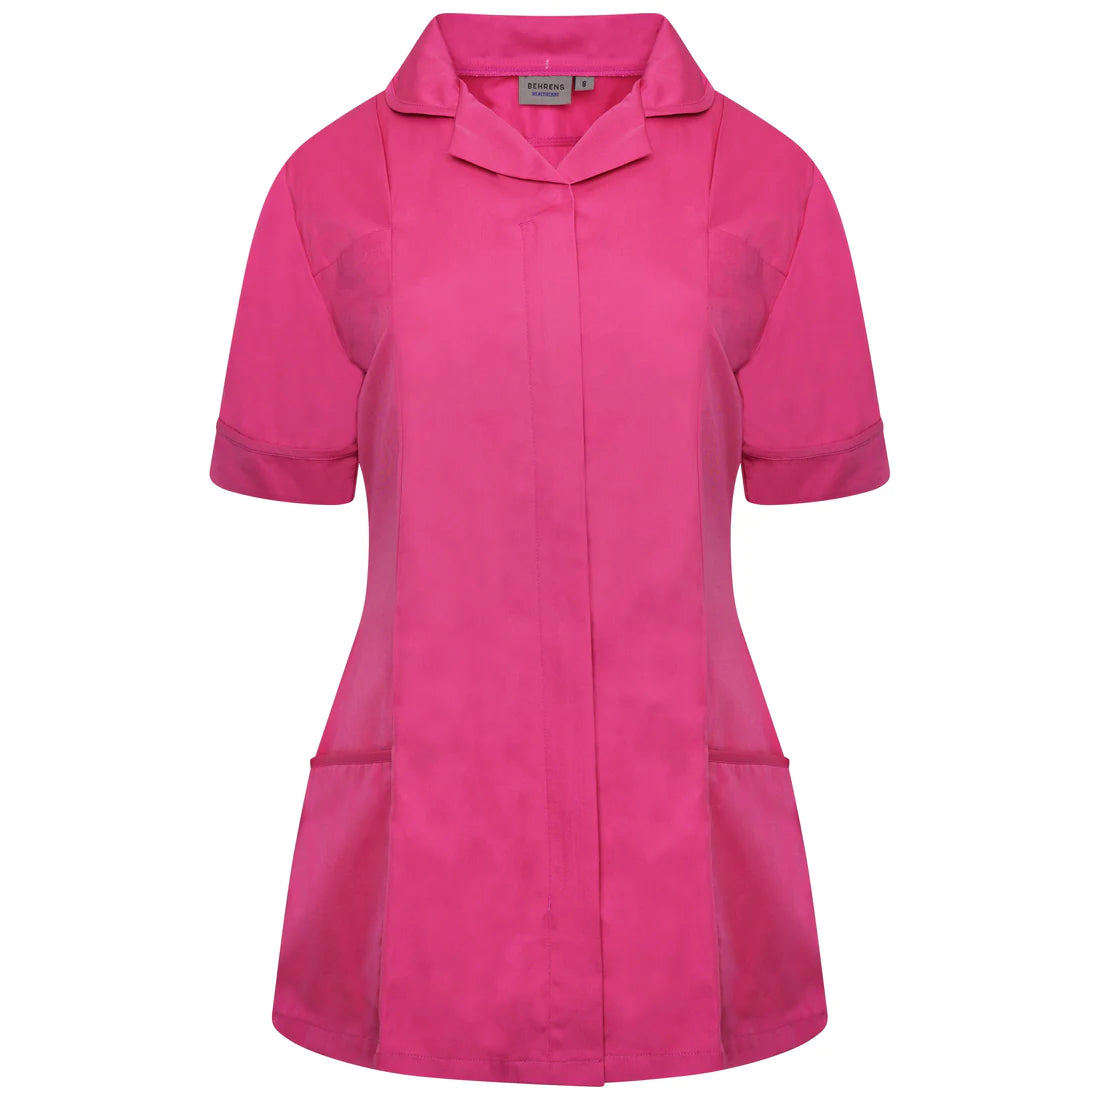 Bright Pink/Bright Pink Contrast Ladies Tunic with Round Collar - NCLTPS